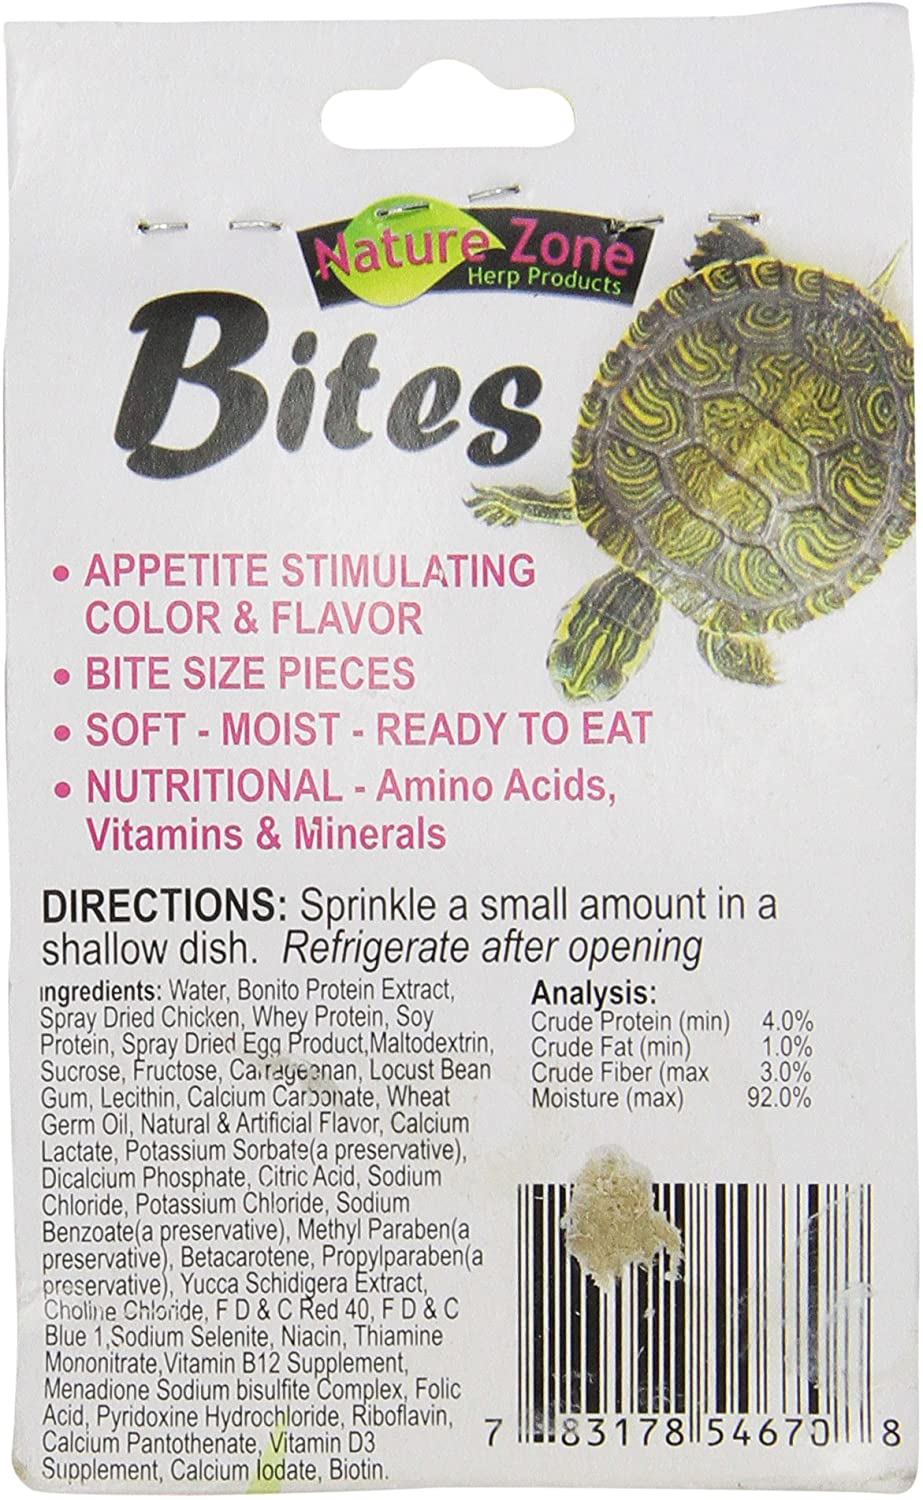 Nature Zone Snz54670 Bites Soft Moist Food for Aquatic Turtles, 2-Ounce Animals & Pet Supplies > Pet Supplies > Small Animal Supplies > Small Animal Food Nature Zone   